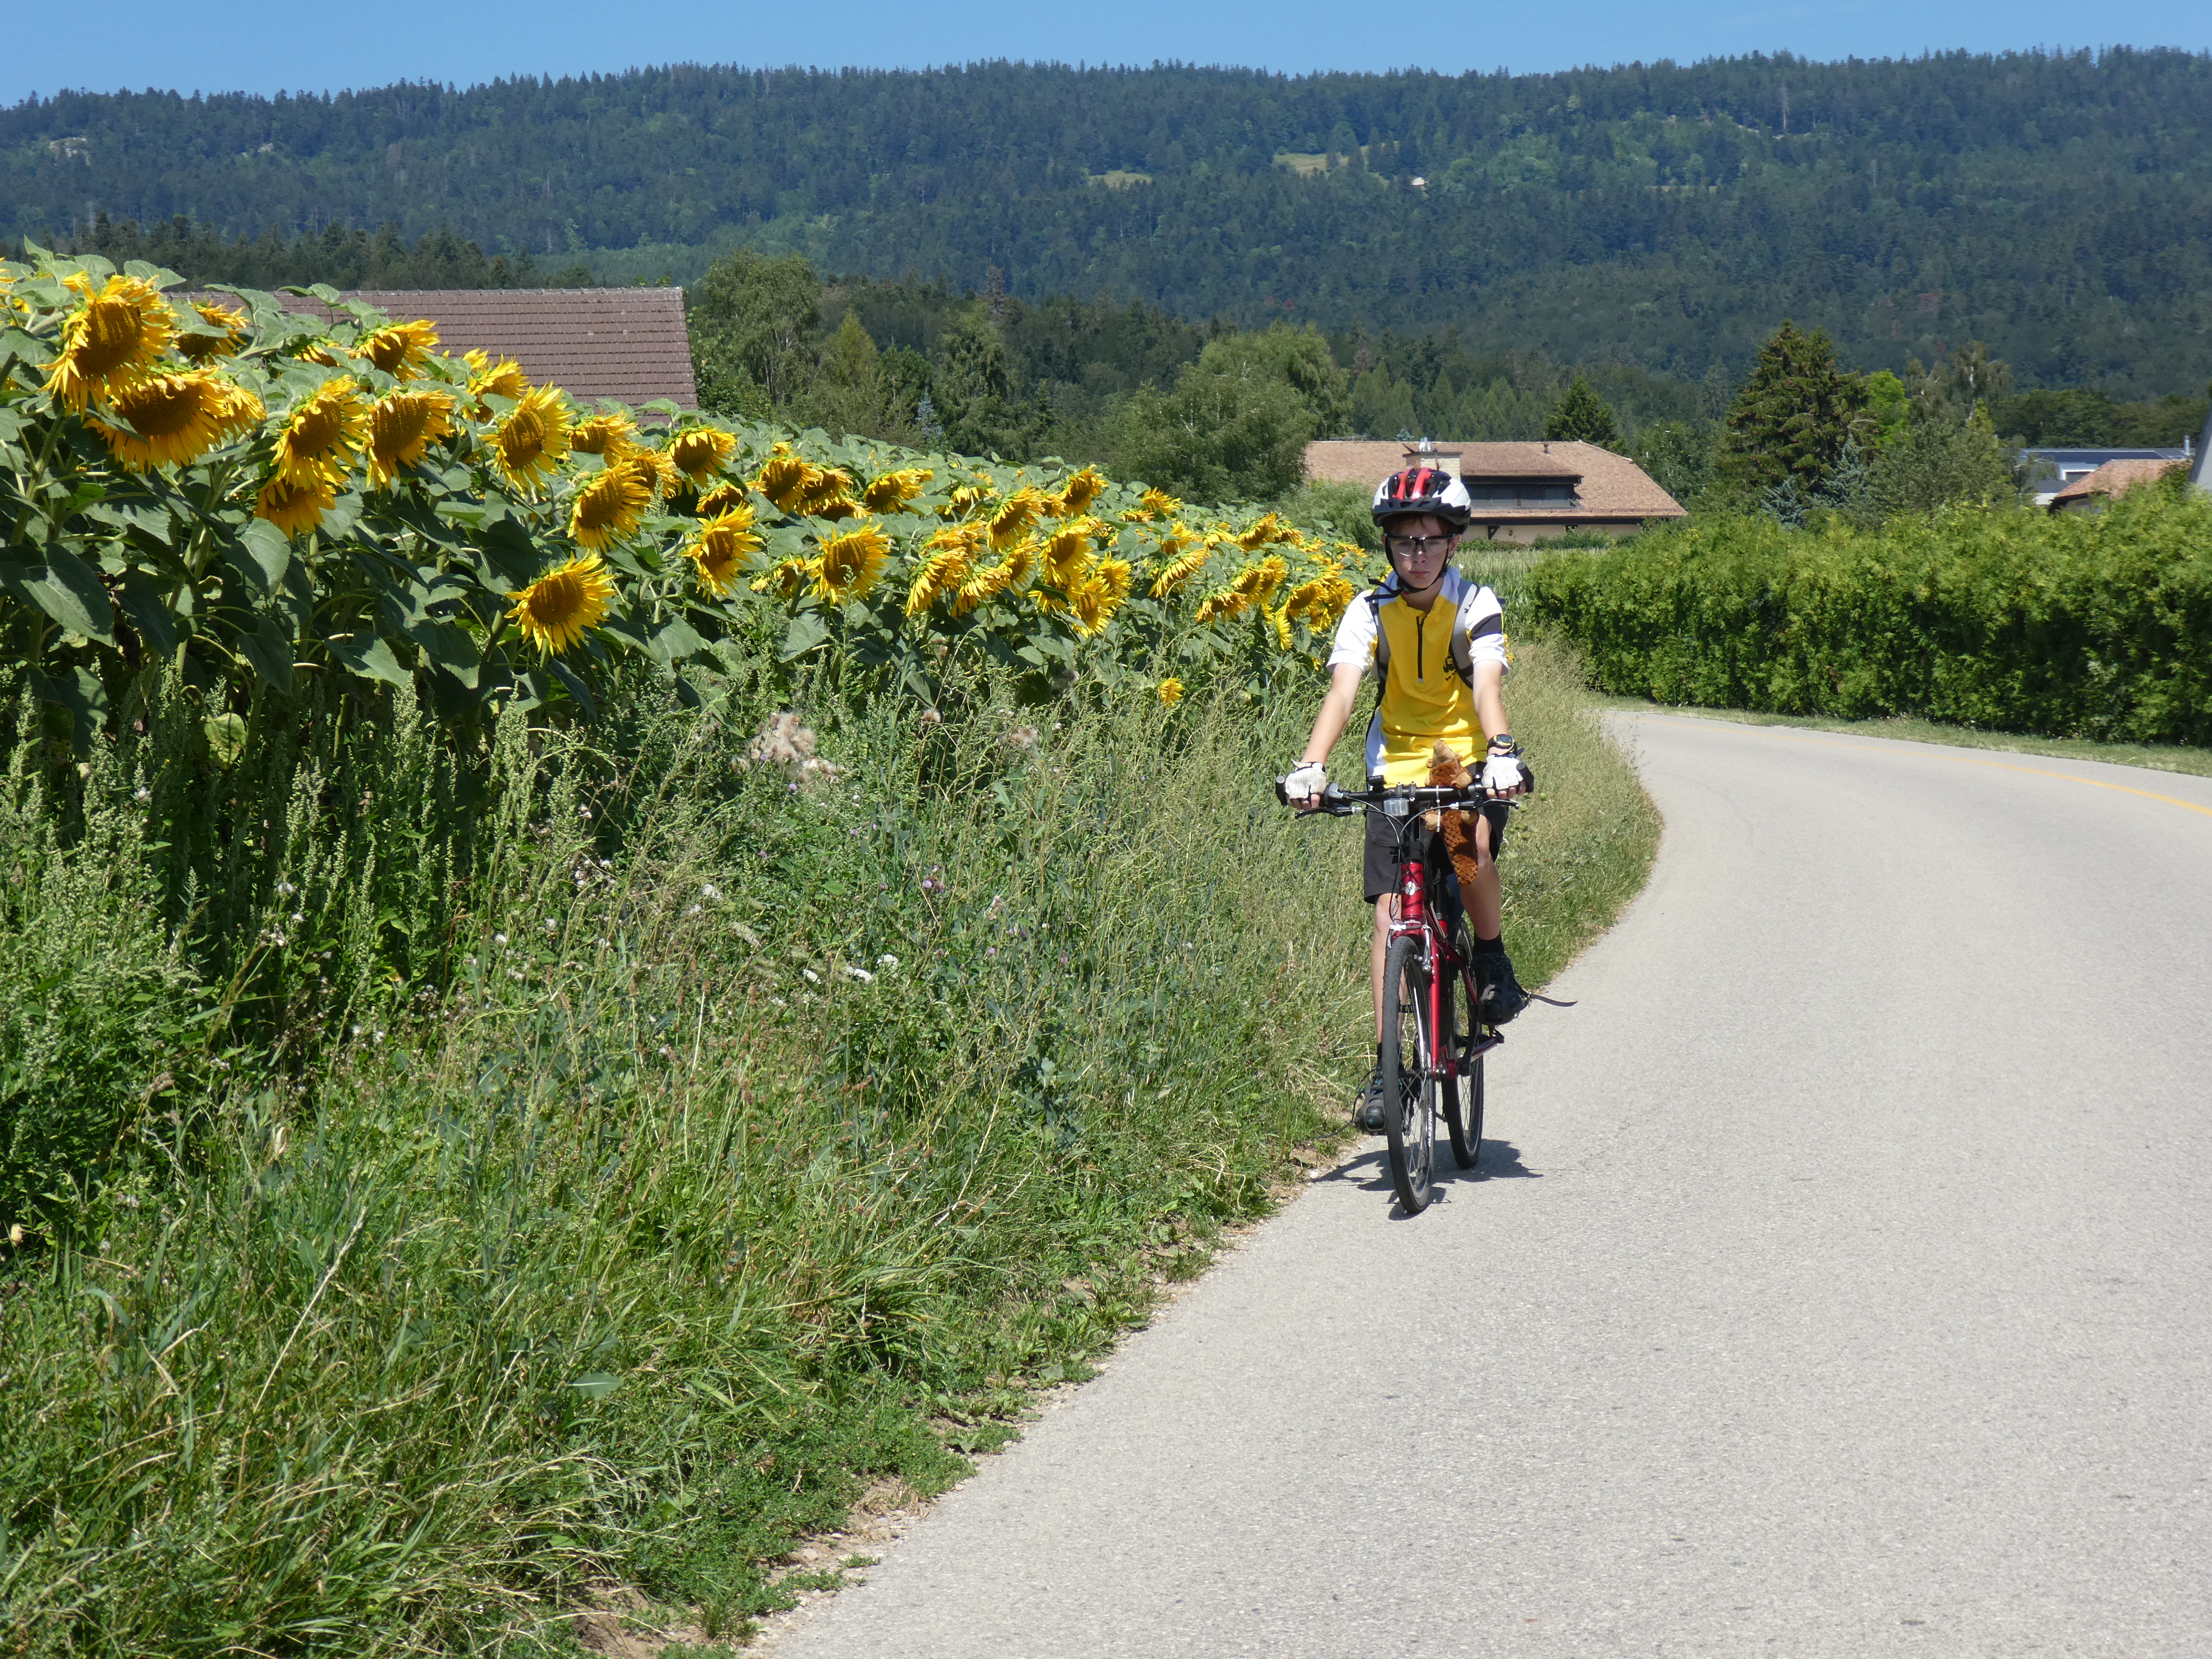 Cycling past sunflowers on the last descent to Lake Geneva